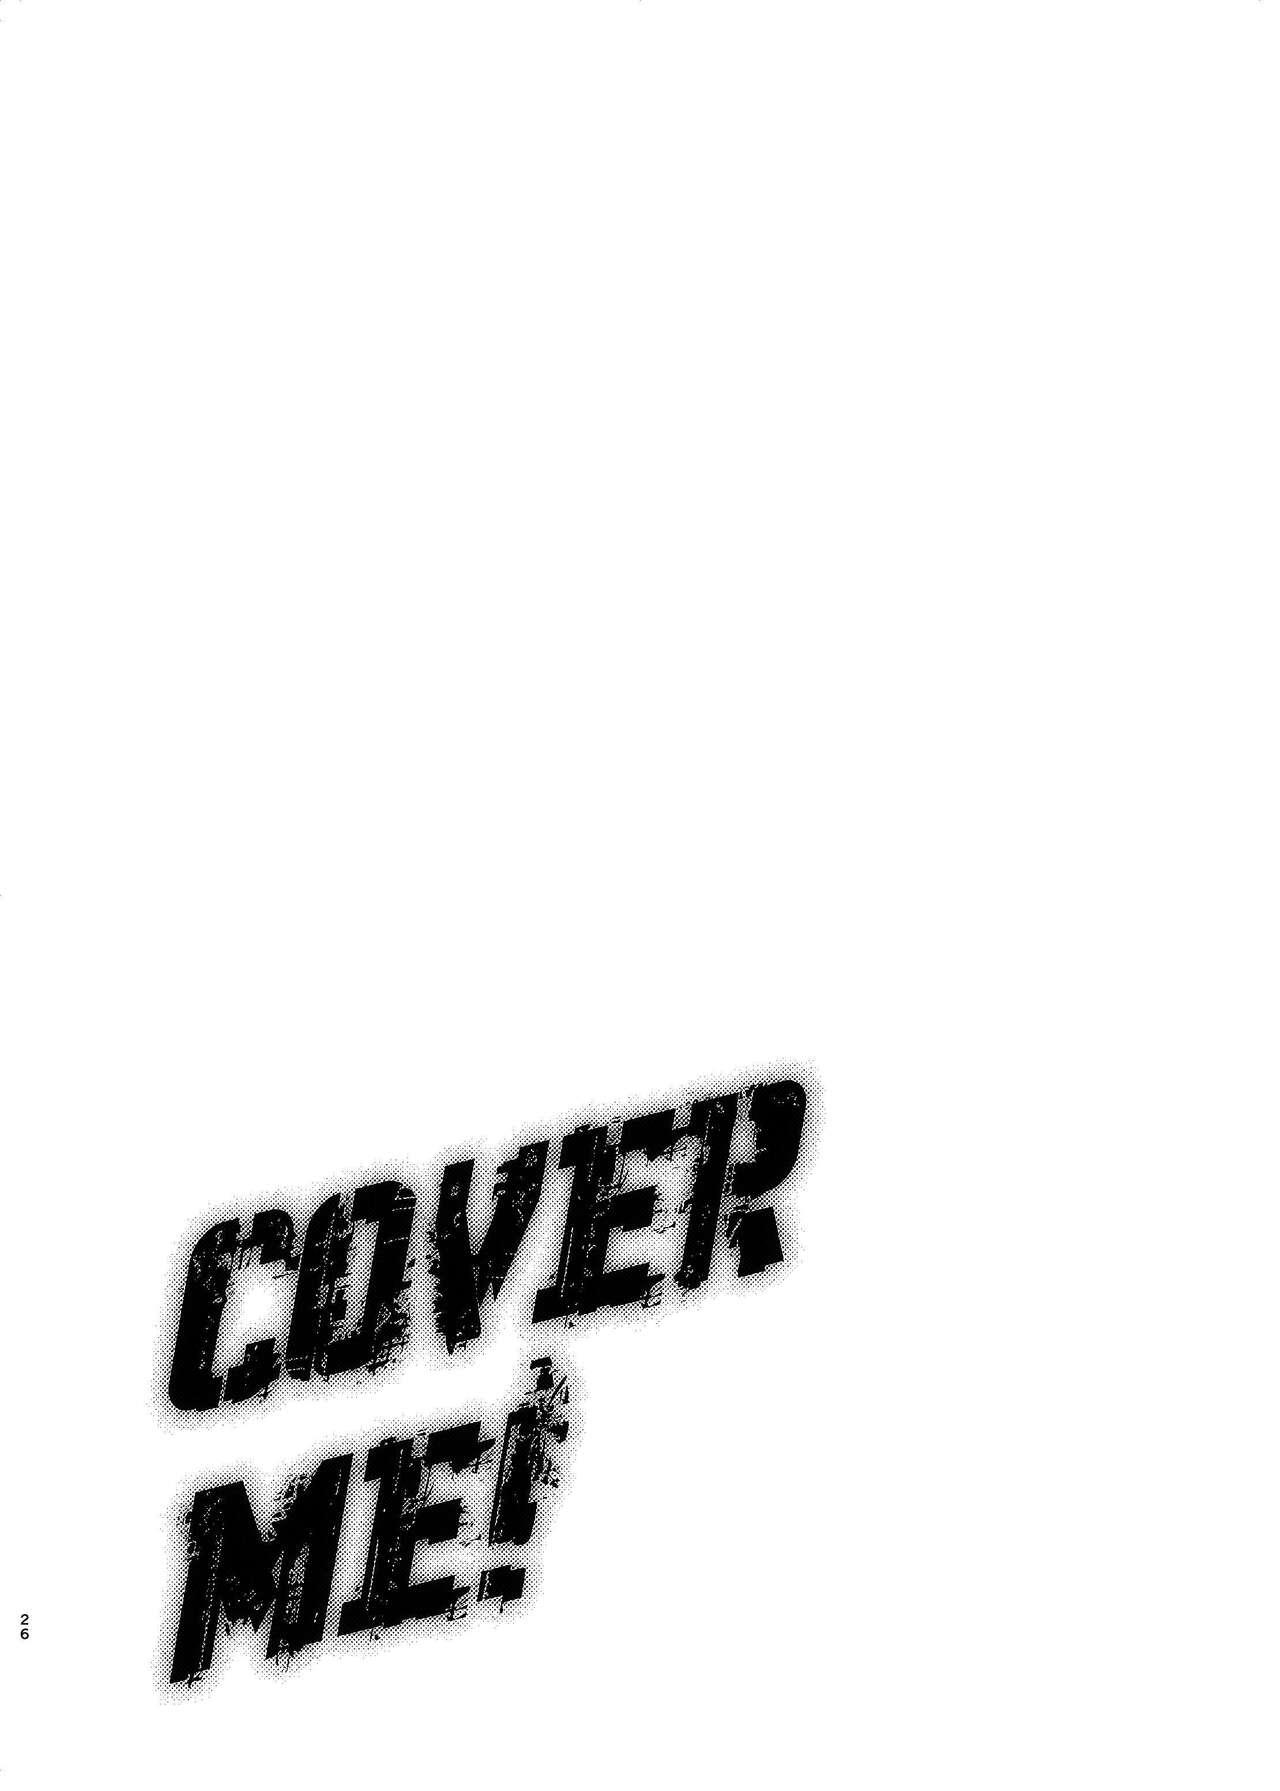 Cover me! 25